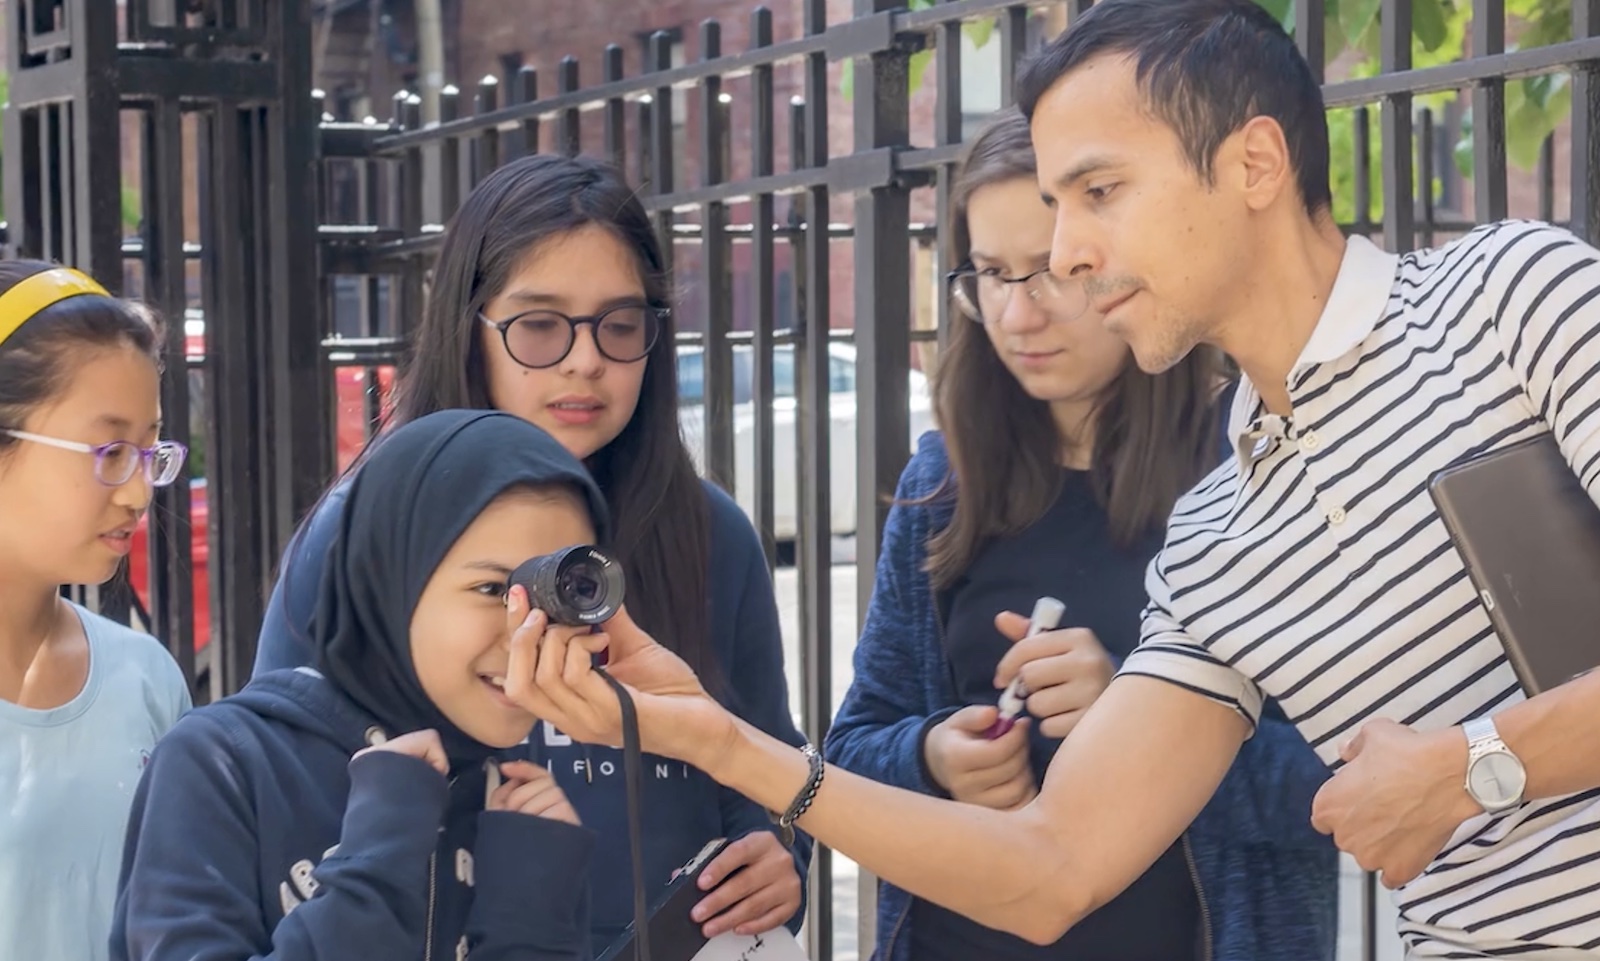 An instructor in a striped shirt holds up a camera lens to the eye of an excited teenage girl, with three teenagers standing behind her